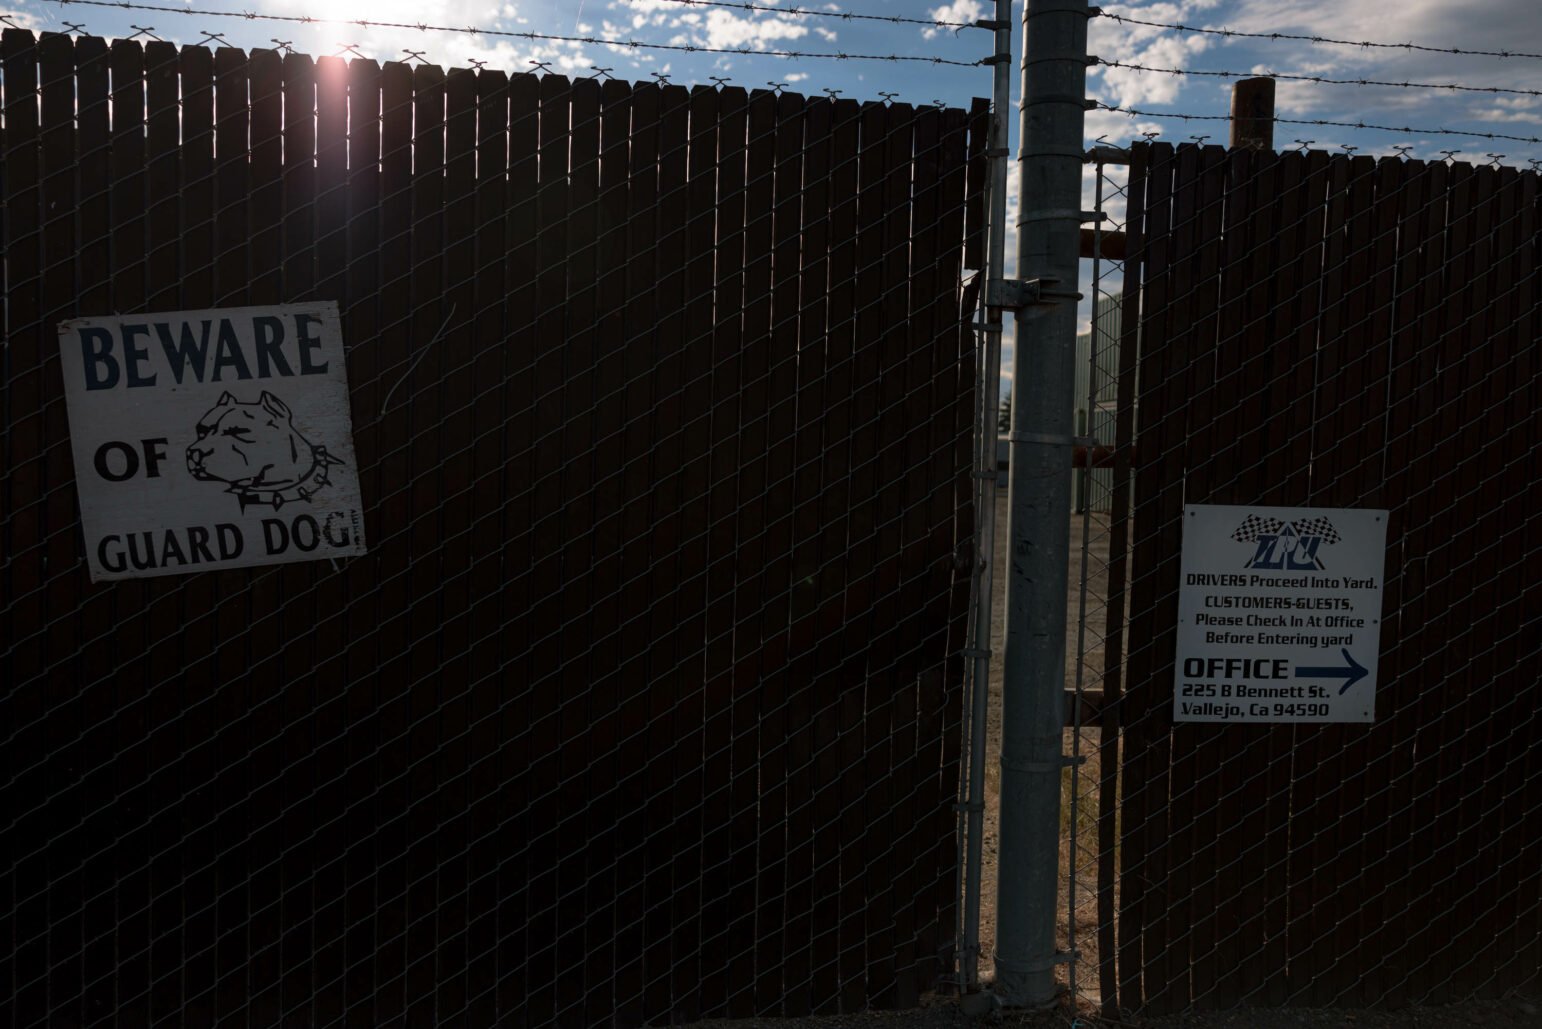 A chain-link fence topped with barbed wire, featuring a 'Beware of Guard Dog' sign on the left and an instruction sign for drivers and customers on the right. The sky is partly cloudy with sunlight shining through, casting shadows on the fence.